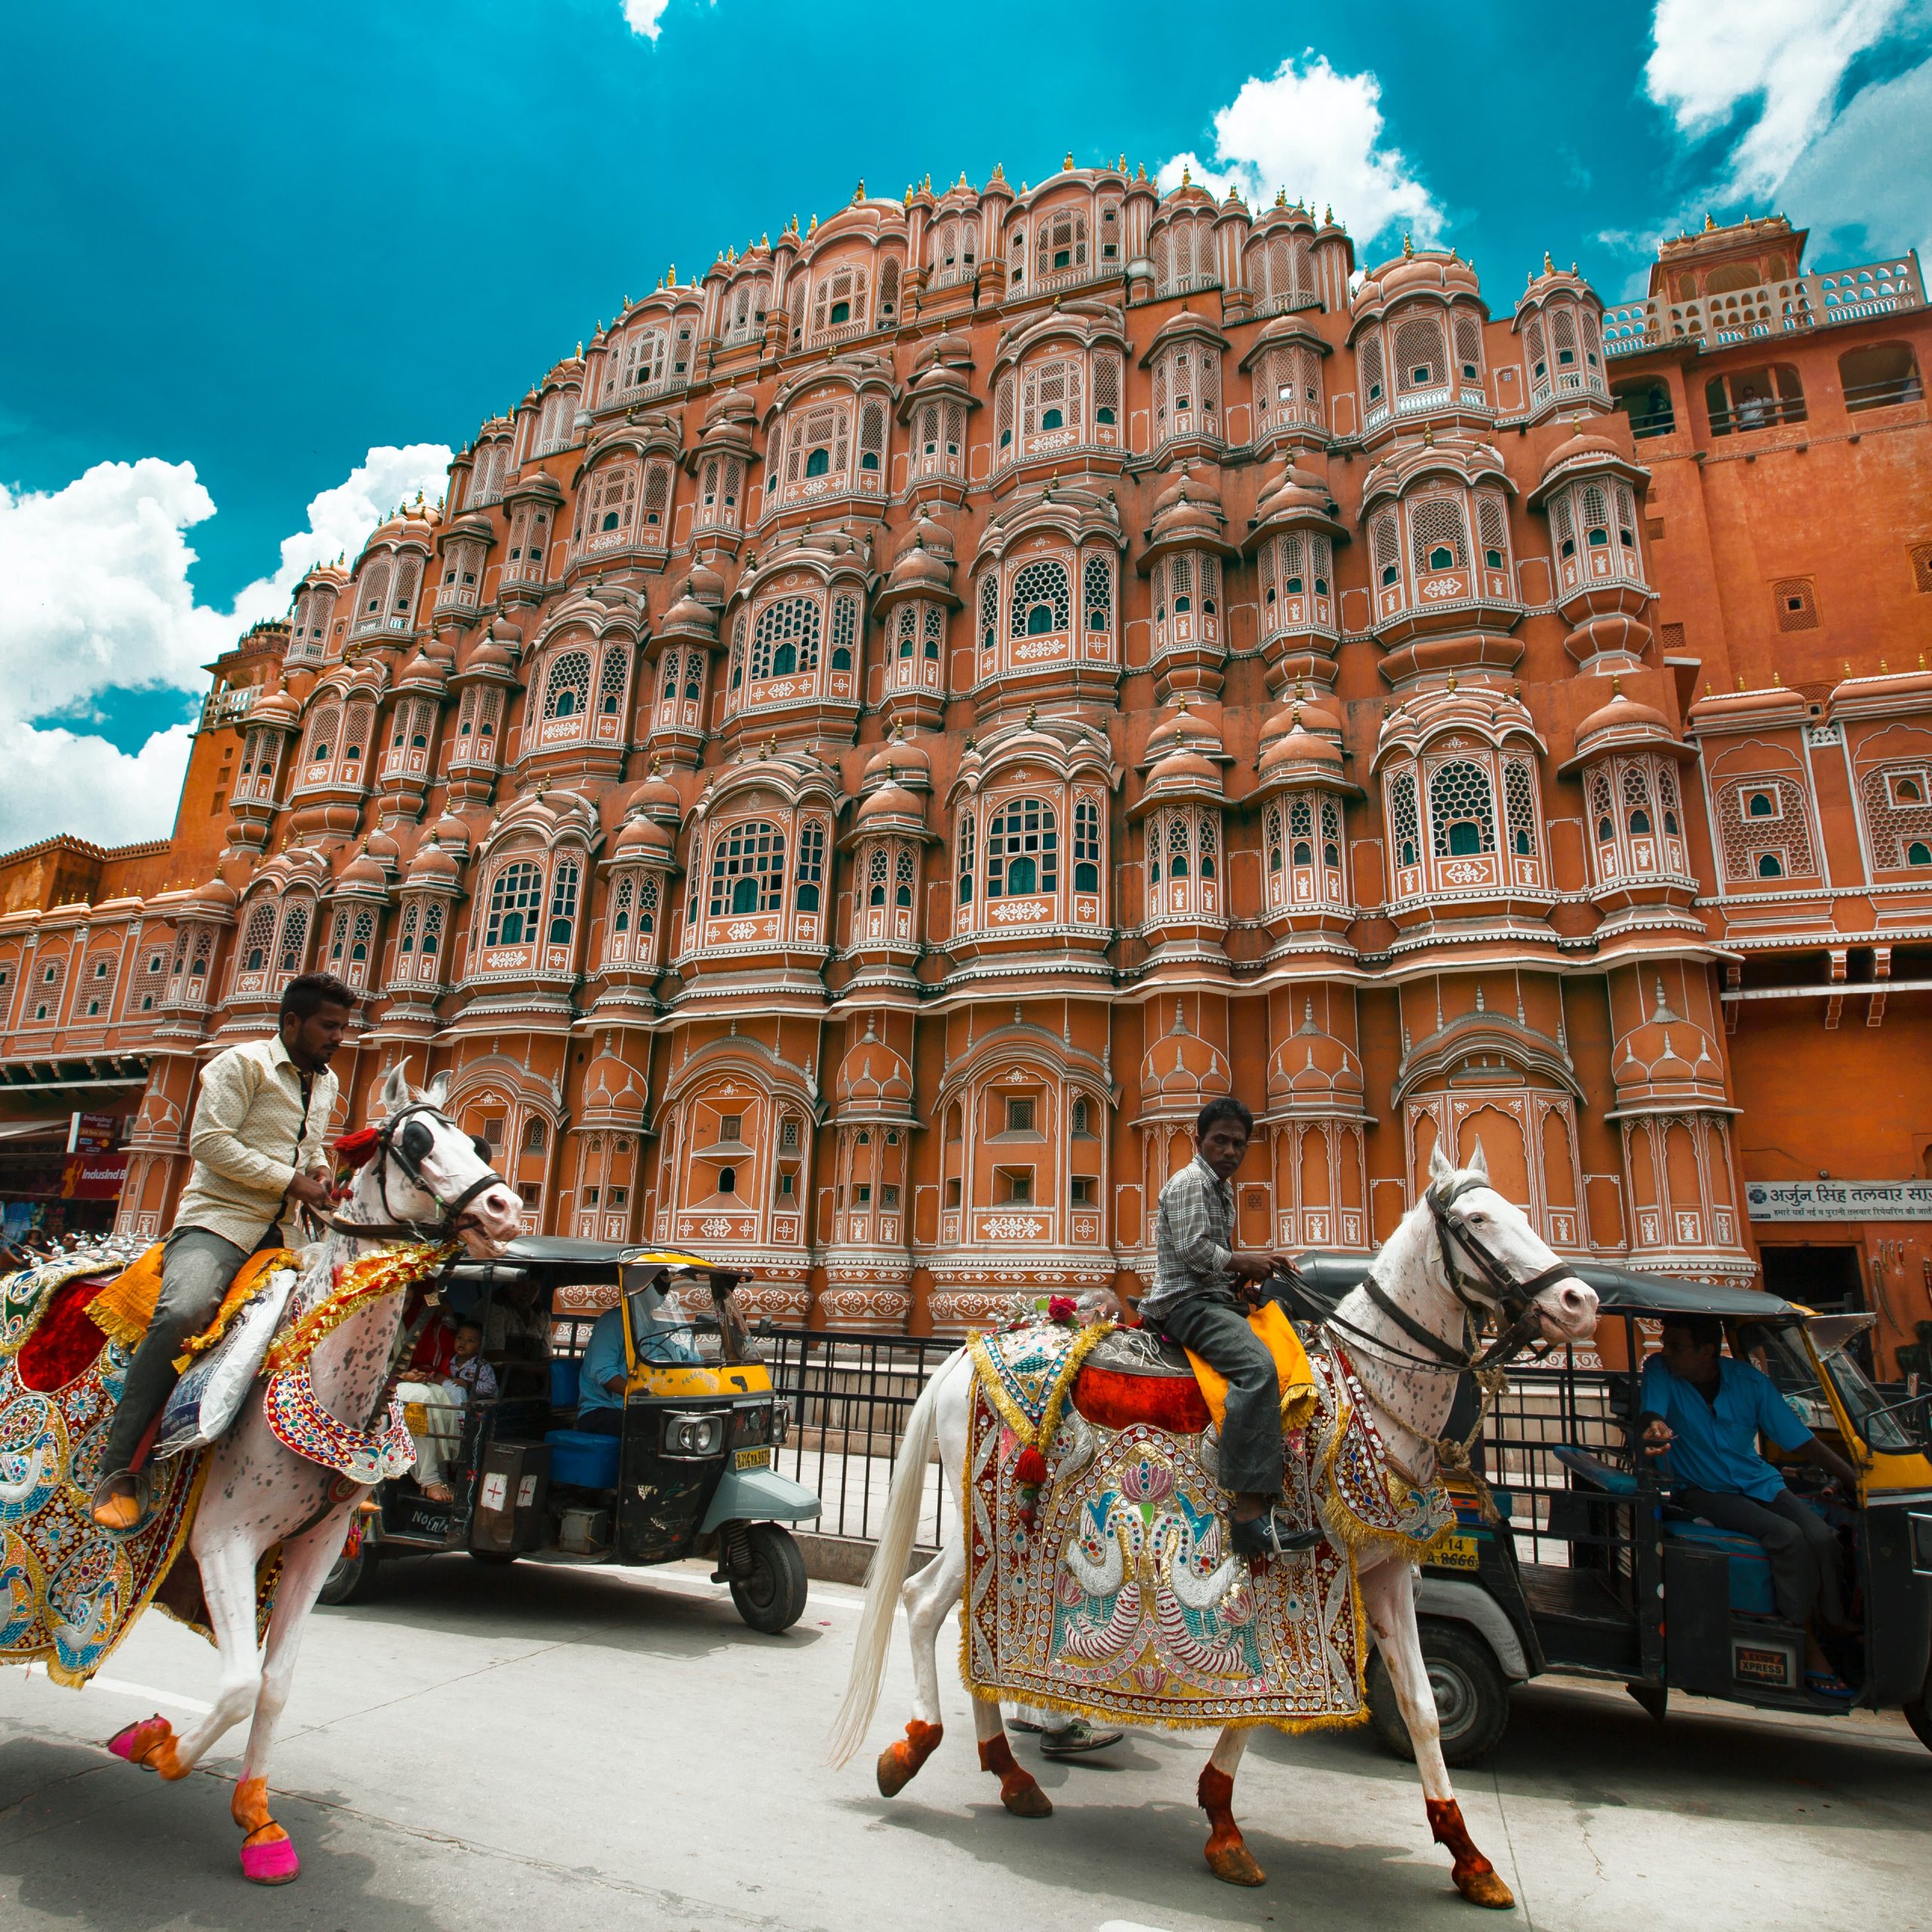 Day 2: Jaipur City Tour and Nahargarh Fort Visit